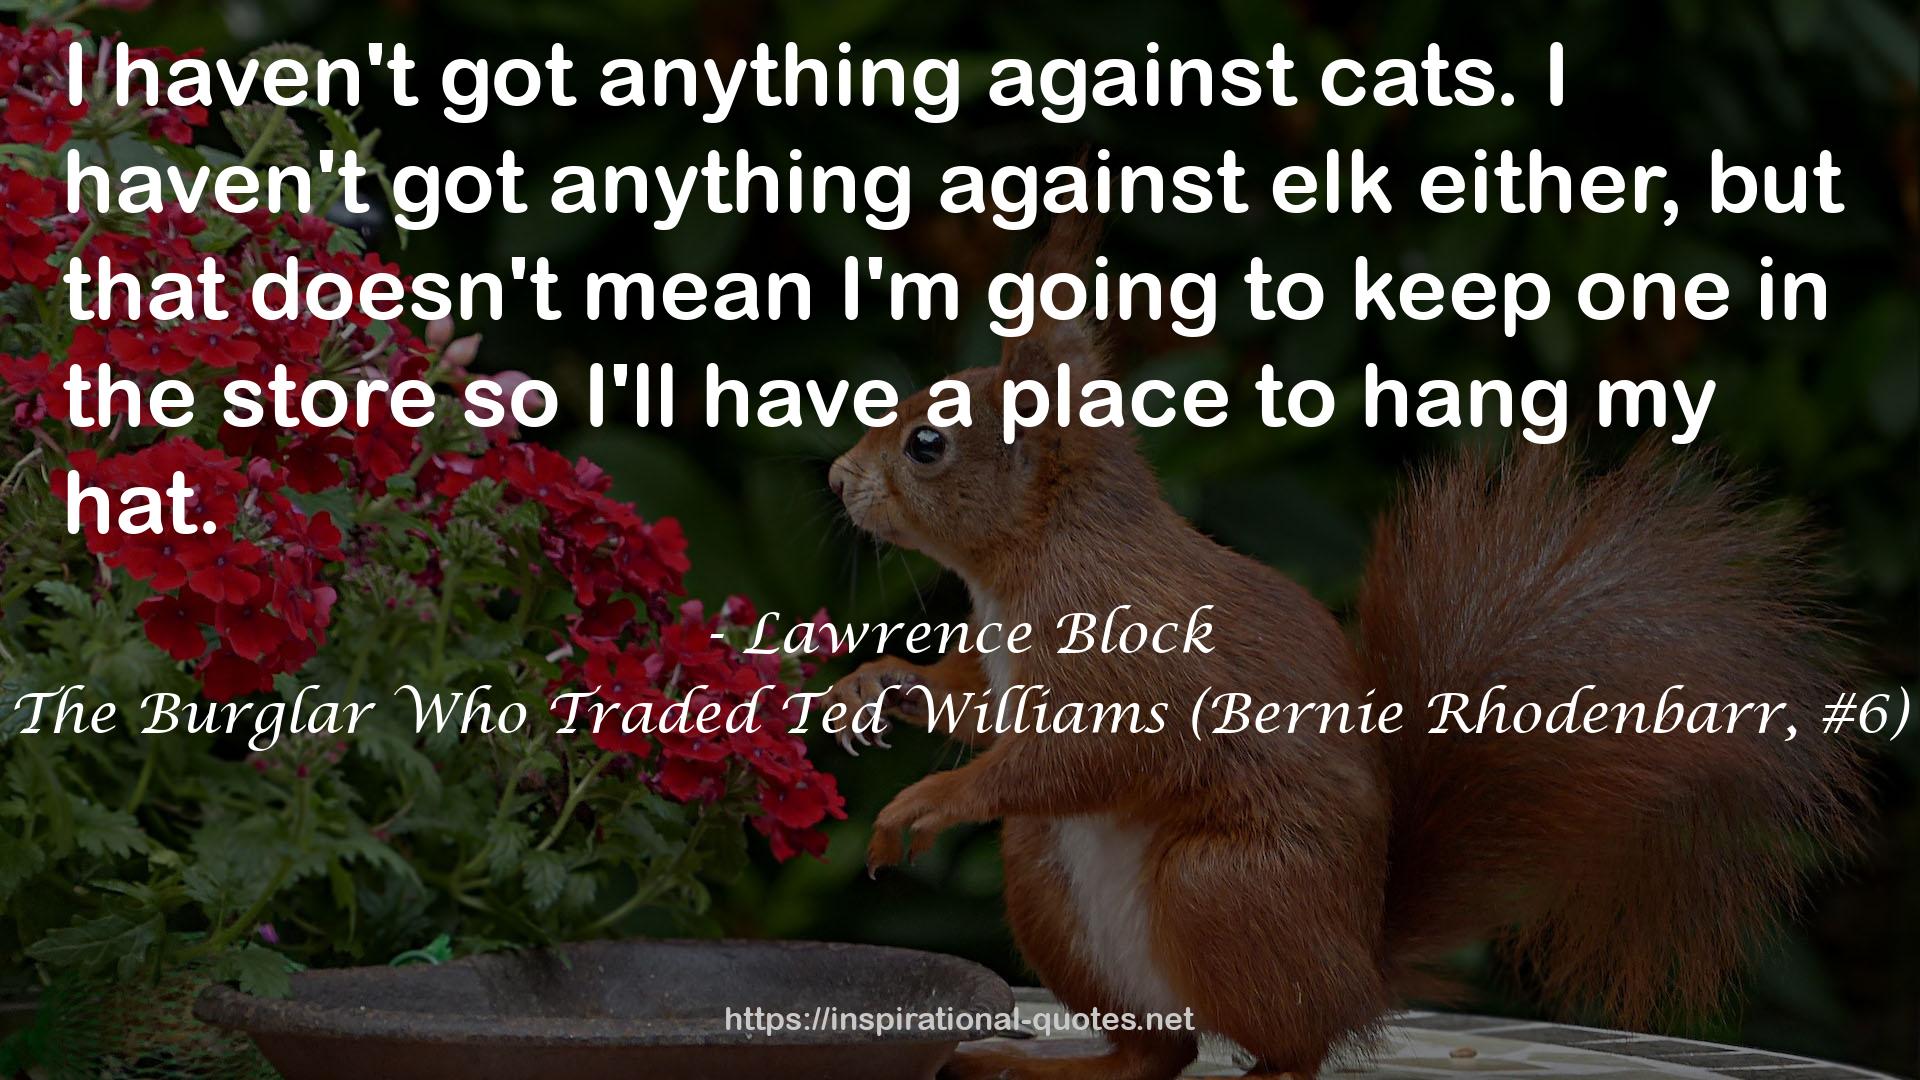 The Burglar Who Traded Ted Williams (Bernie Rhodenbarr, #6) QUOTES